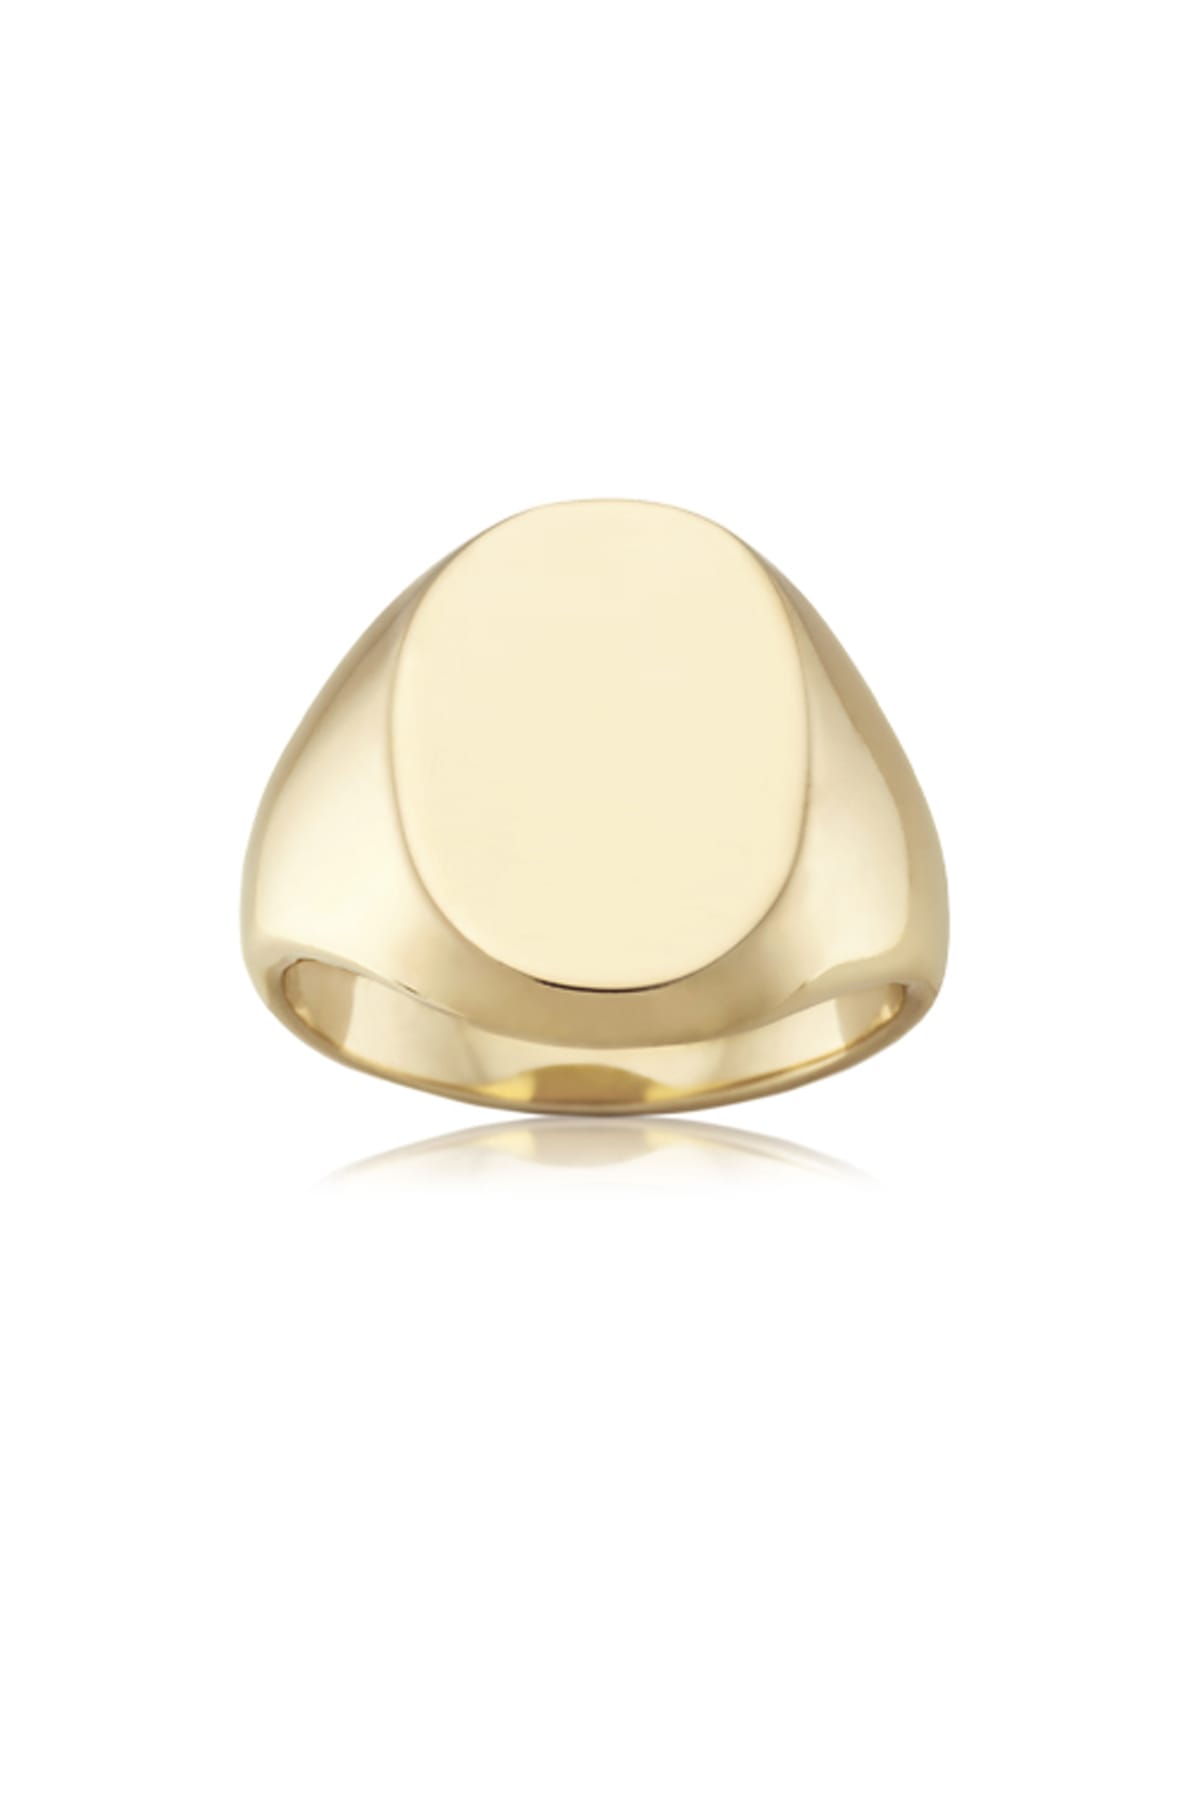 Solid Large Oval Flat Top Signet Ring available at LeGassick Diamonds and Jewellery Gold Coast, Australia.